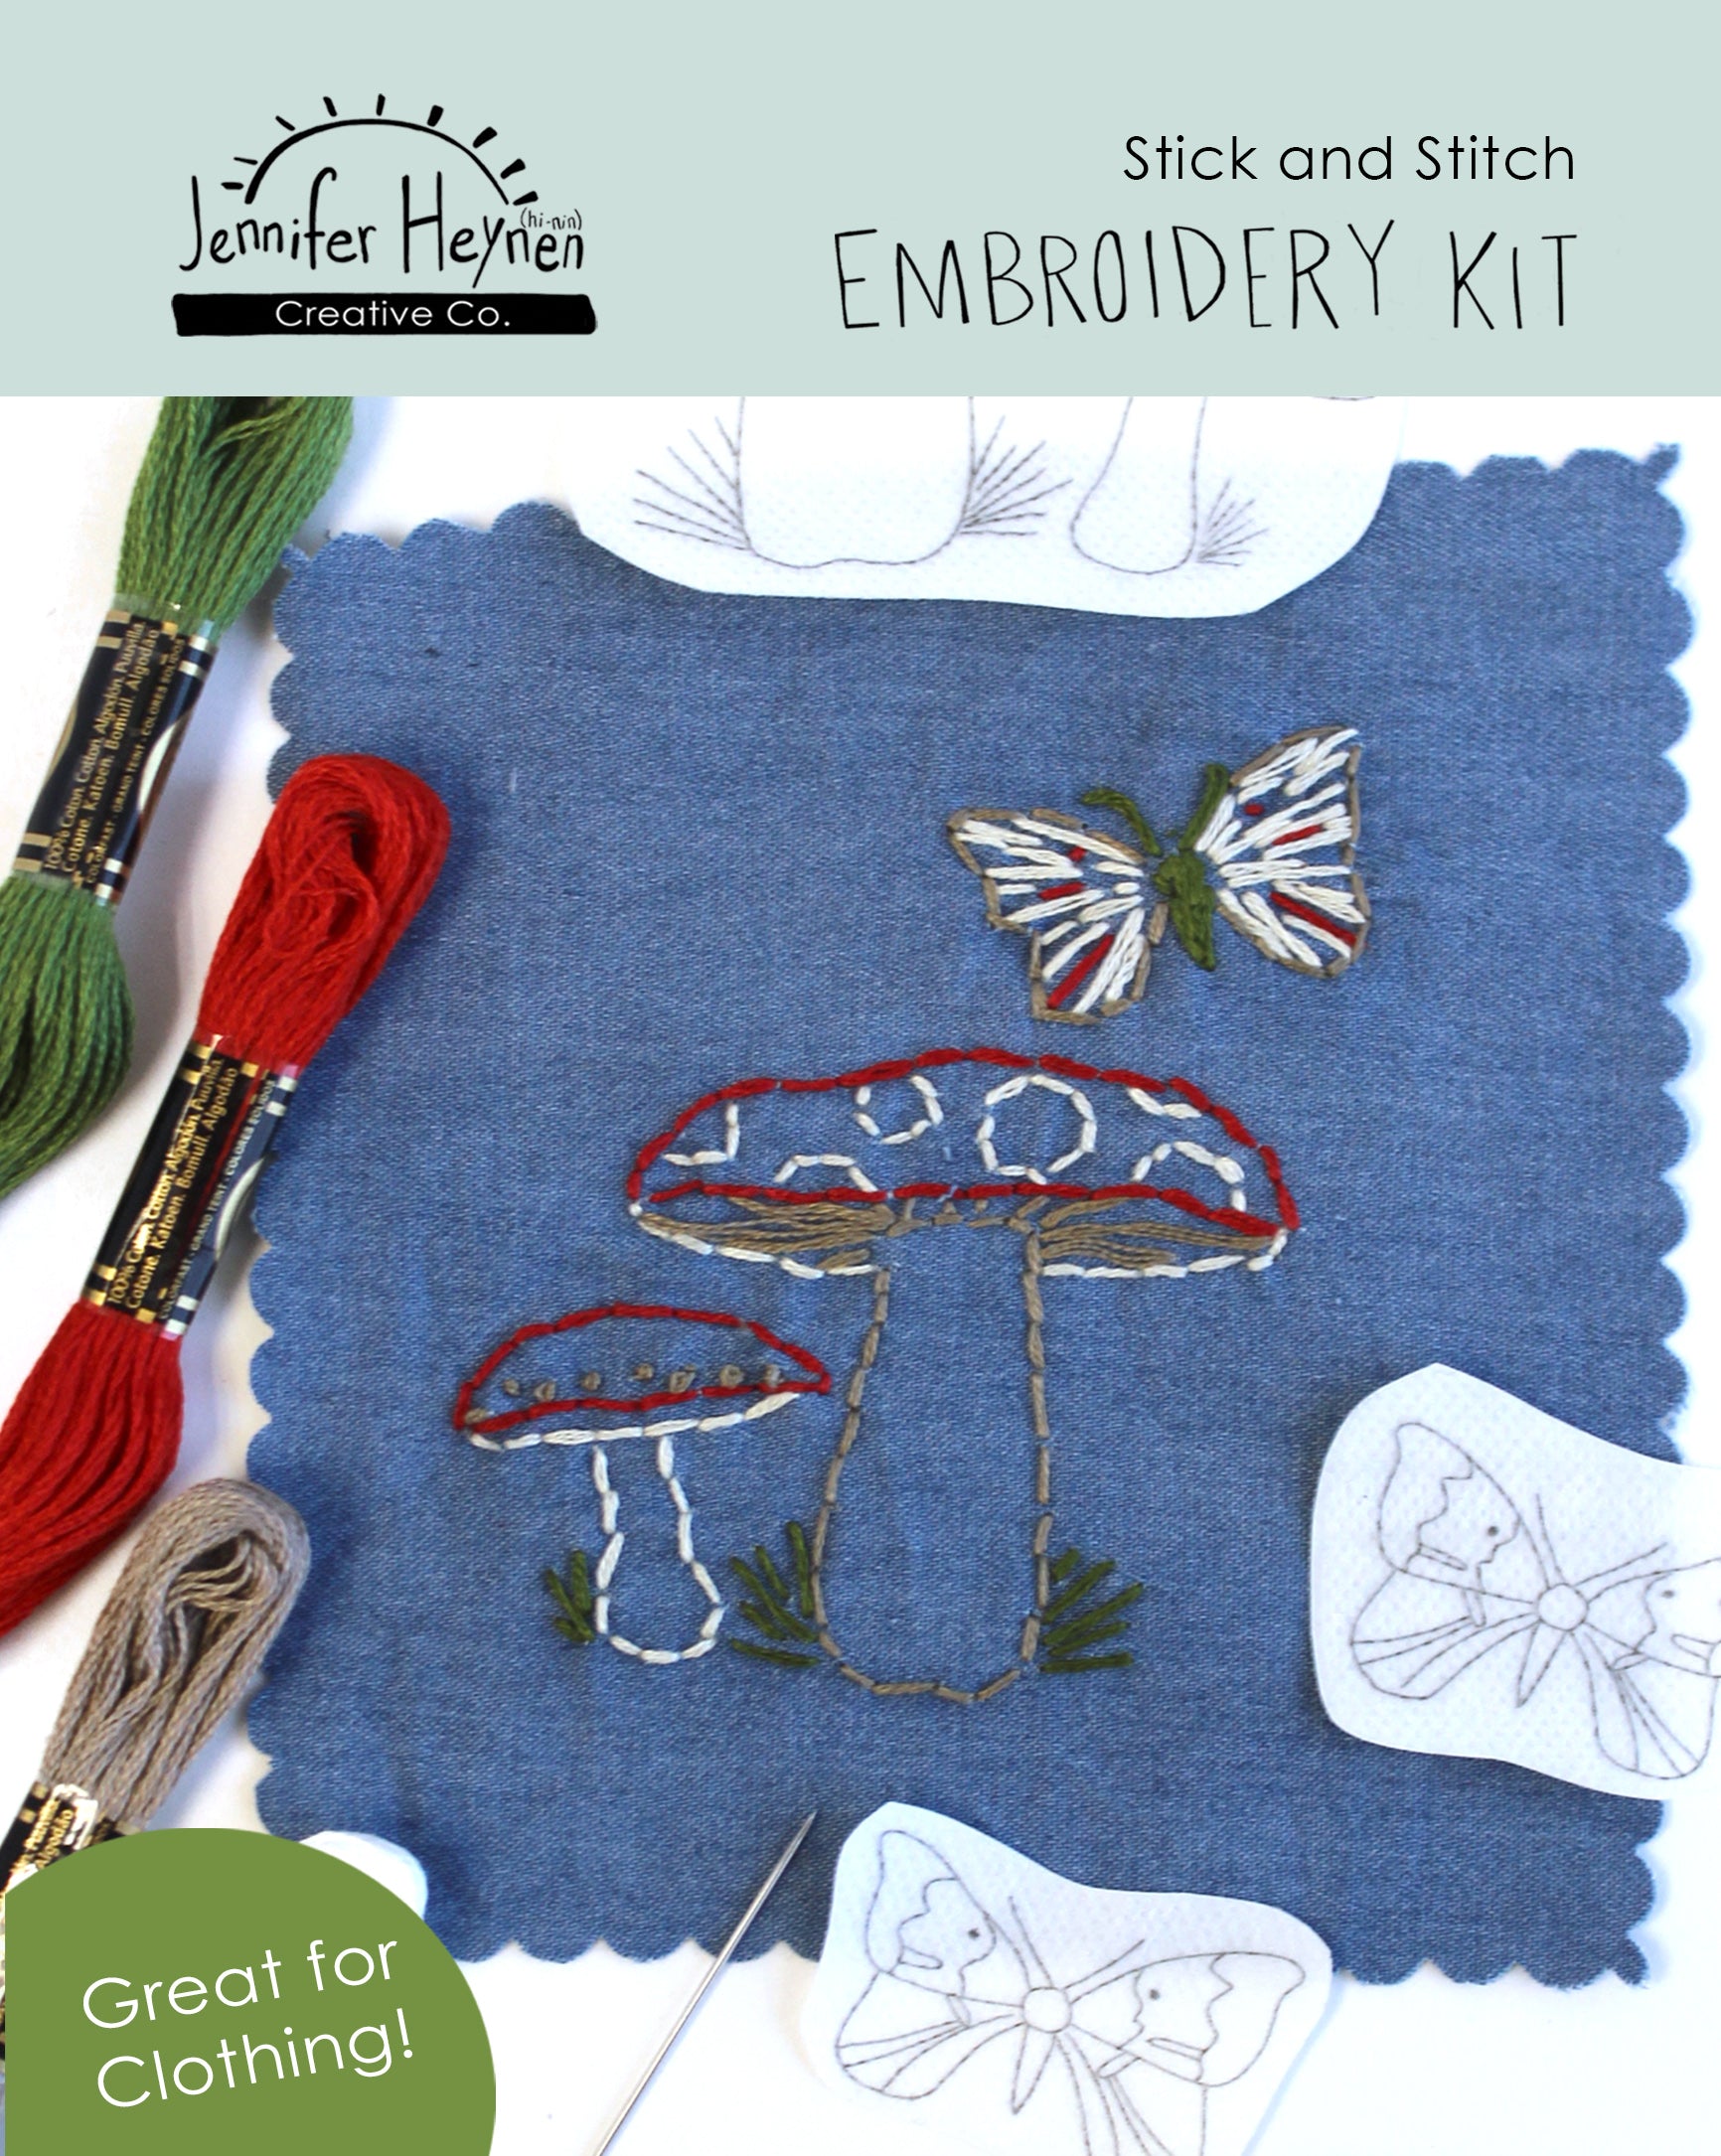 DIY Embroidery Stitch Practice Kit Handmade Embroidery Starter Kit to Learn 30 Different Stitches Hand Stitch Embroidery Skill Techniques for